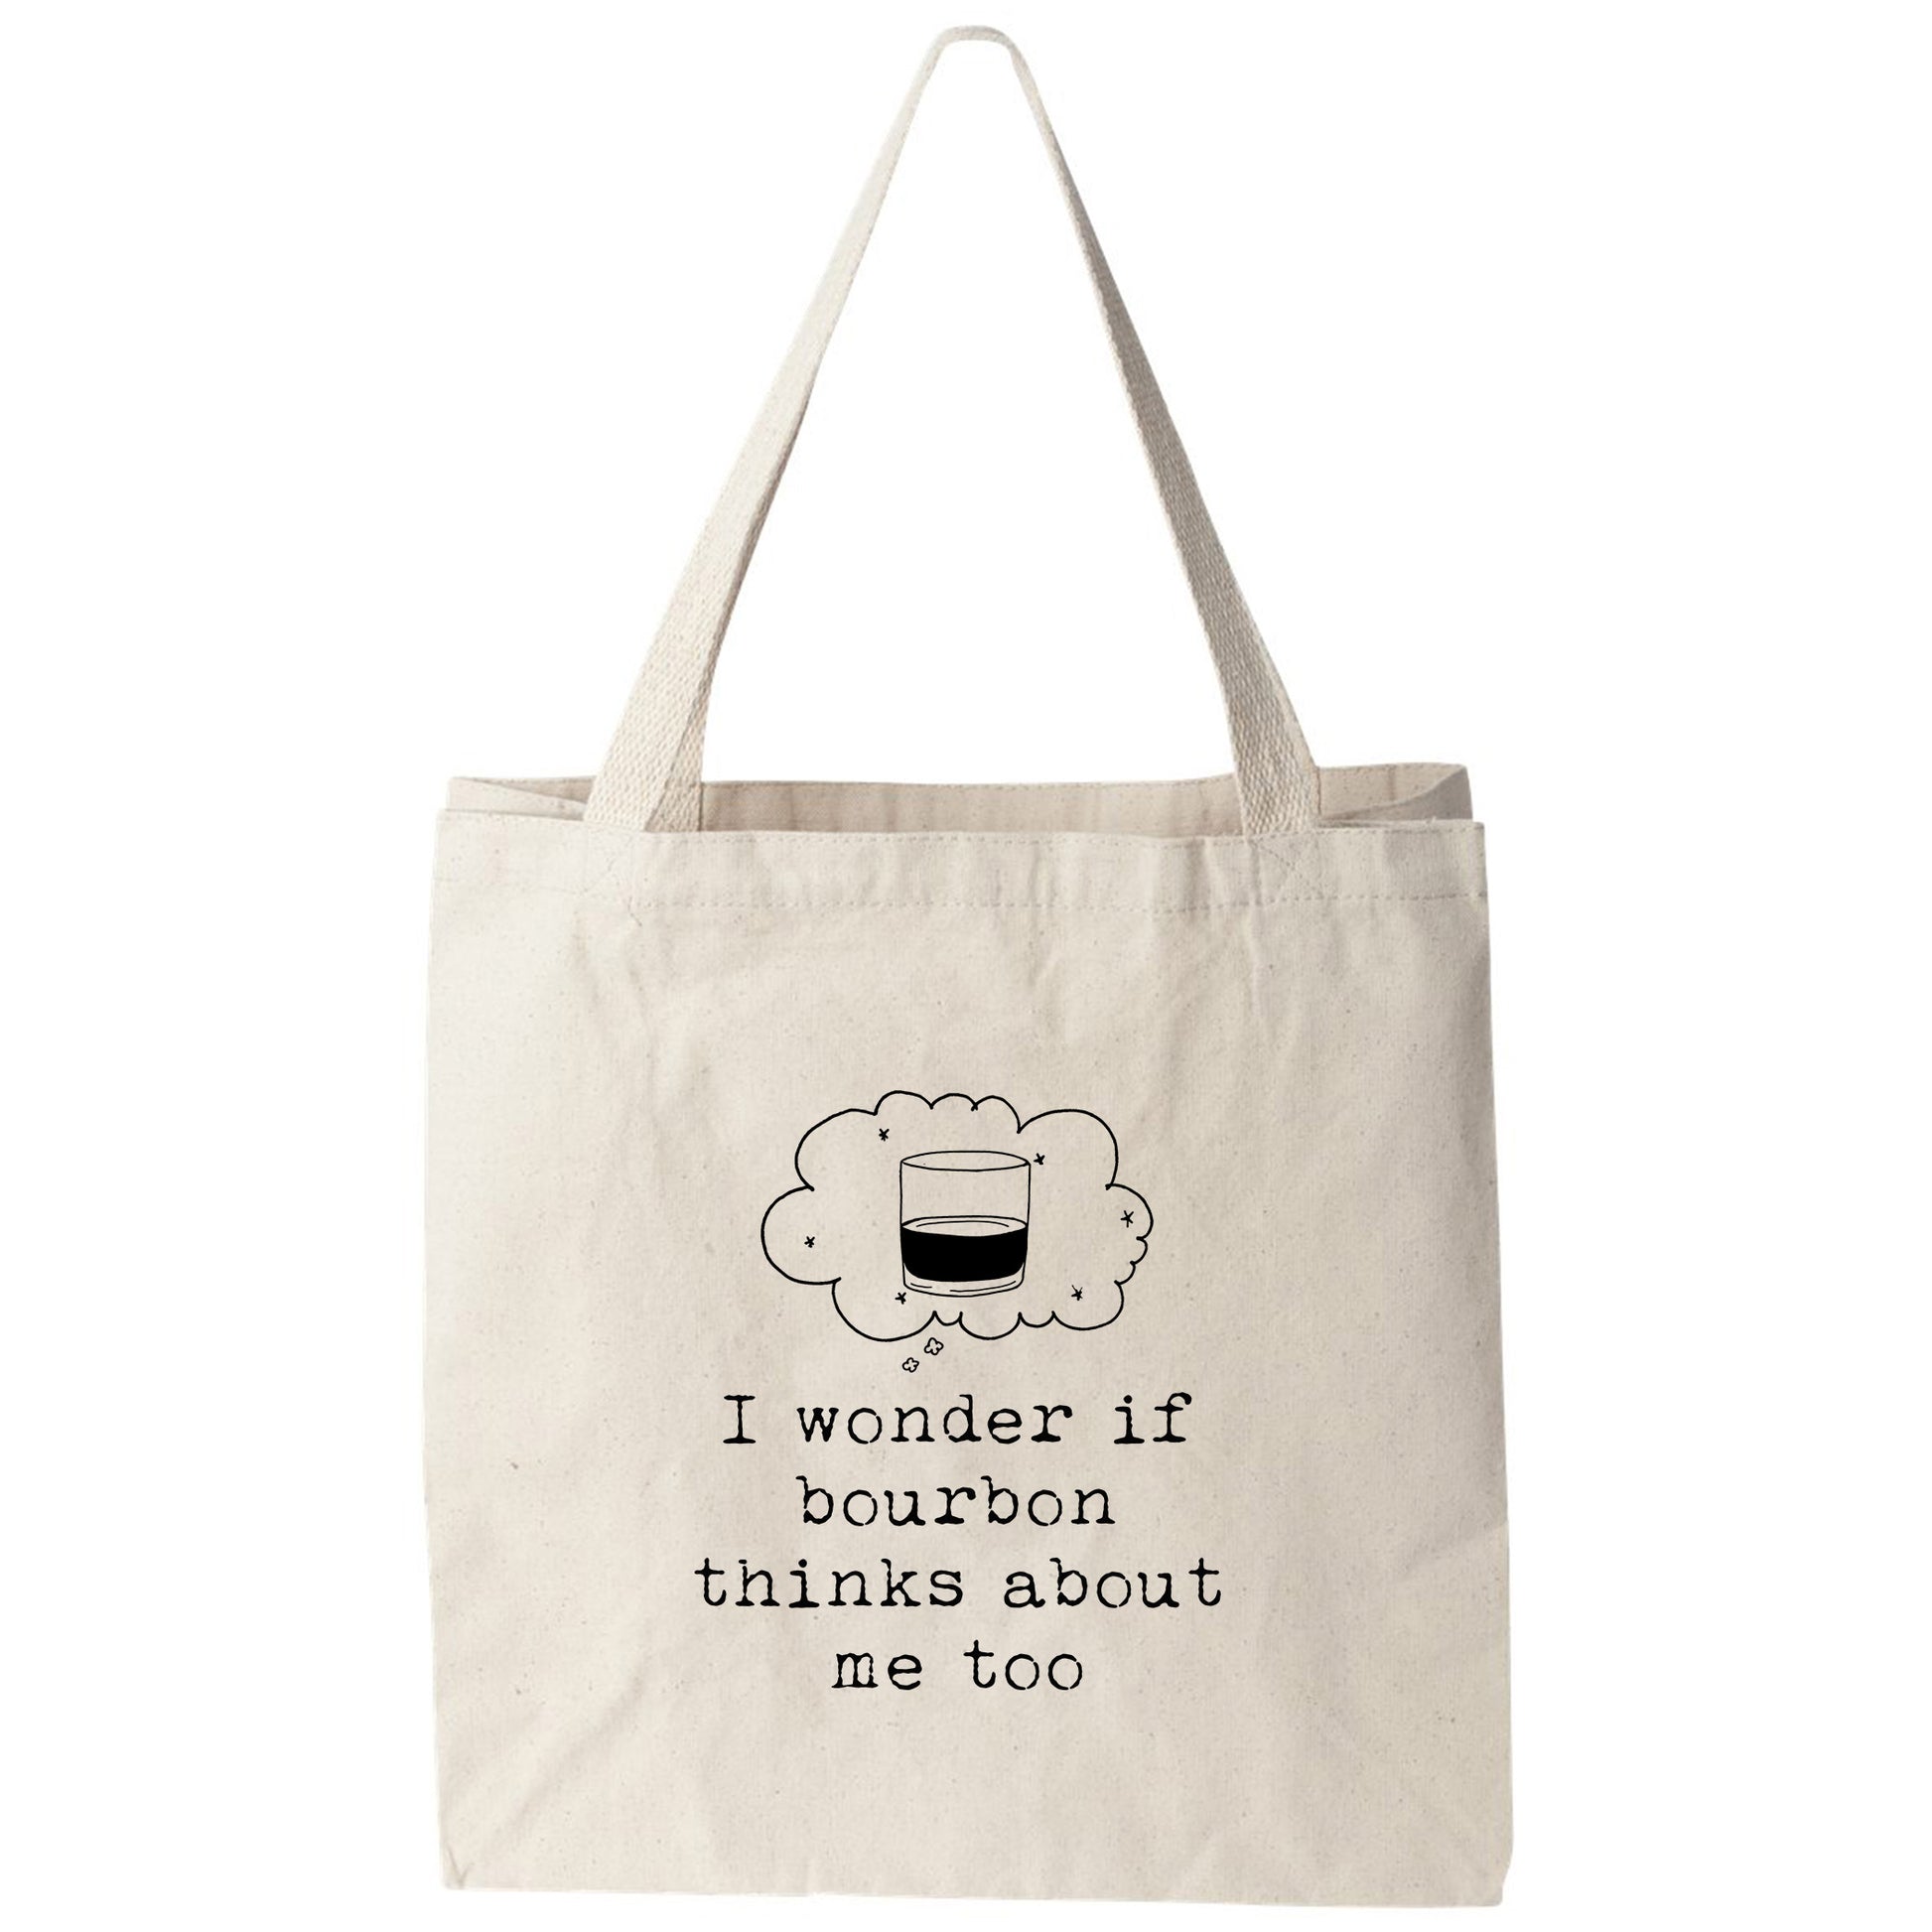 a tote bag that says i wonder if bourbon thinks about me too